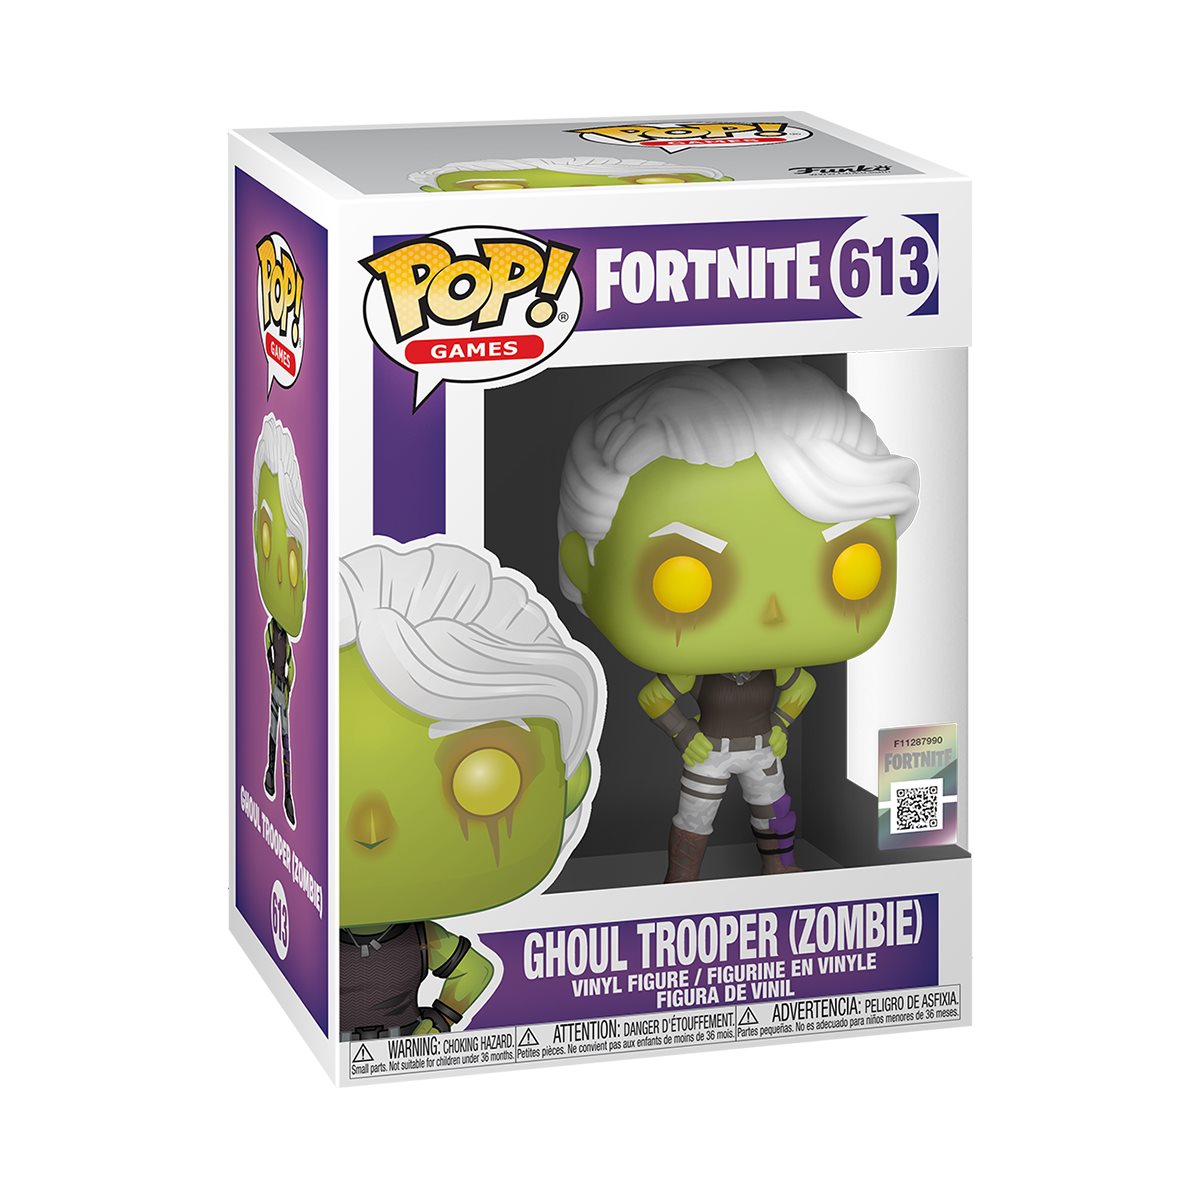 Funko Pop! Games: - Fortnite - Peely 889698447294 (Toy Used)